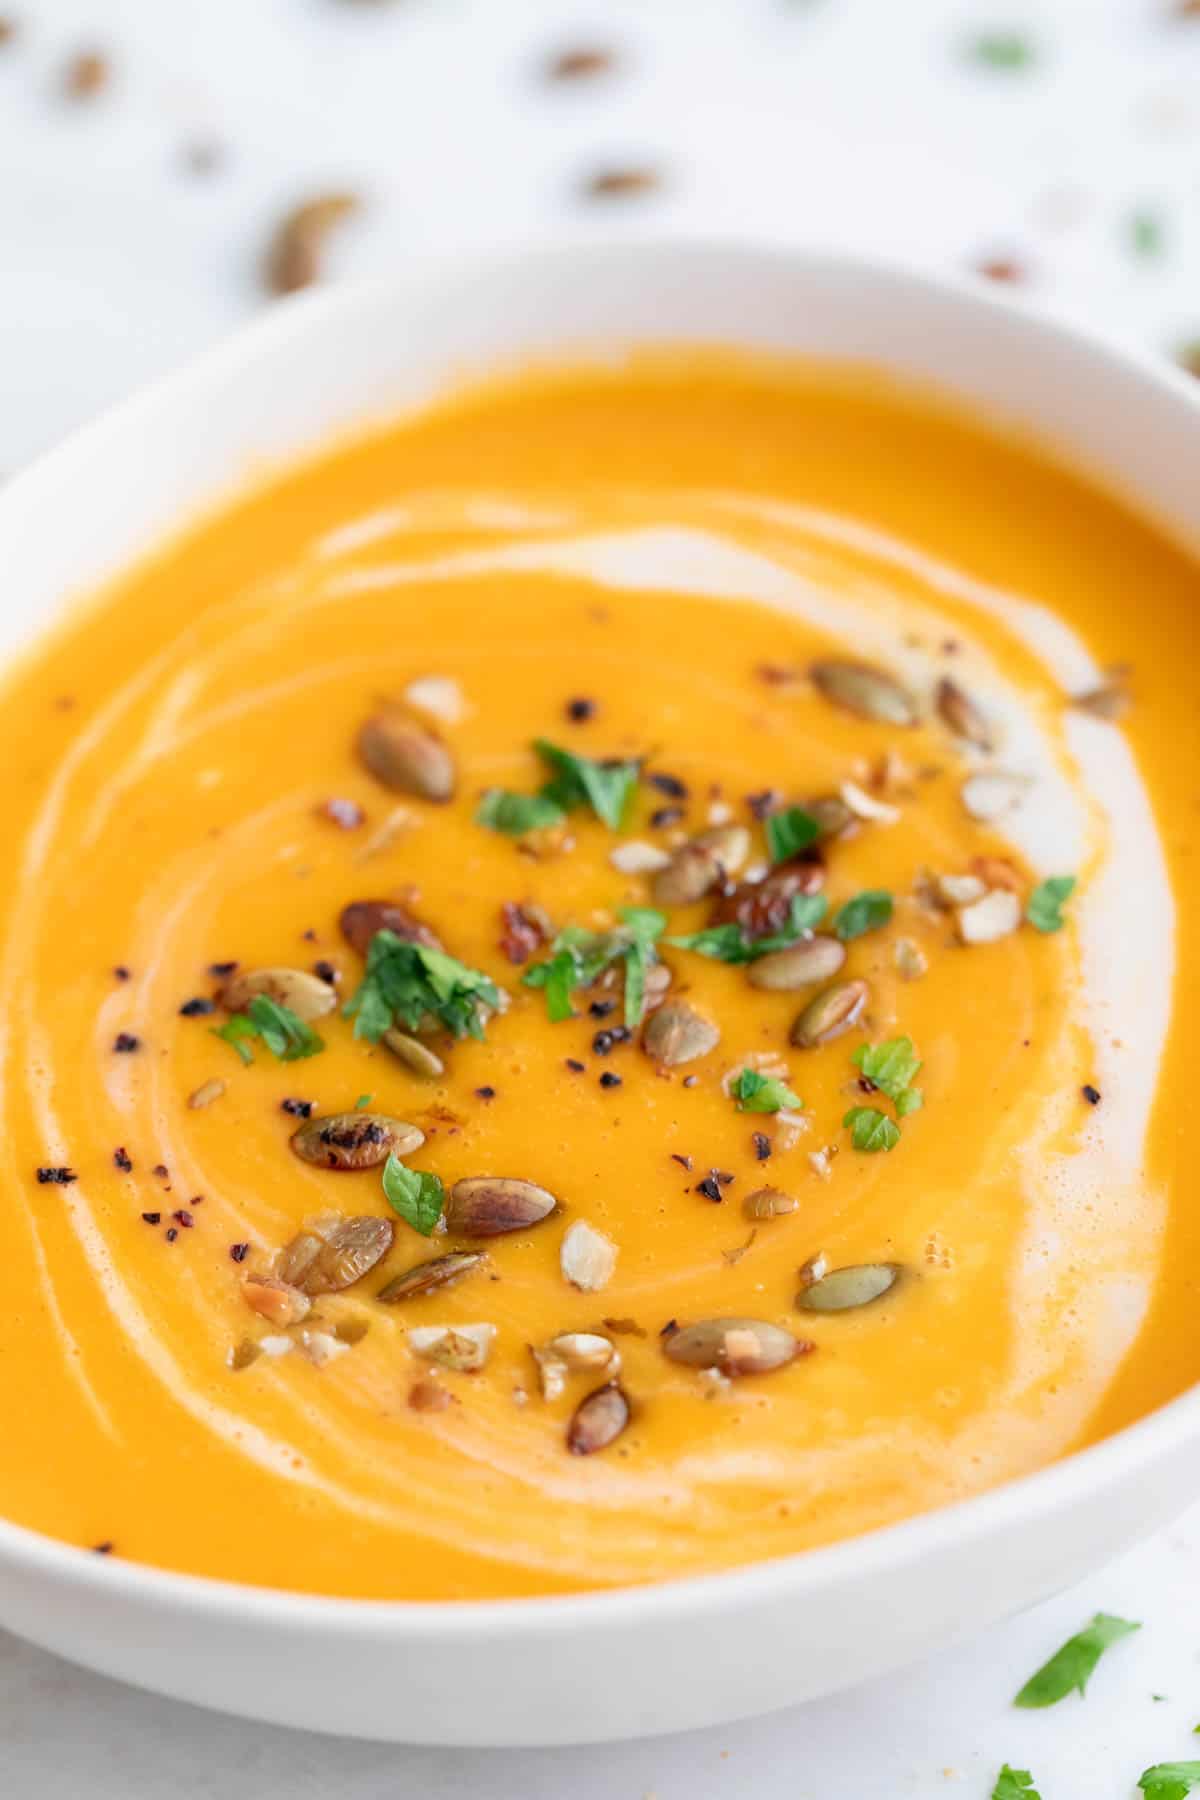 Bowl of vegan pumpkin soup garnished with parsley, coconut milk, and black pepper.